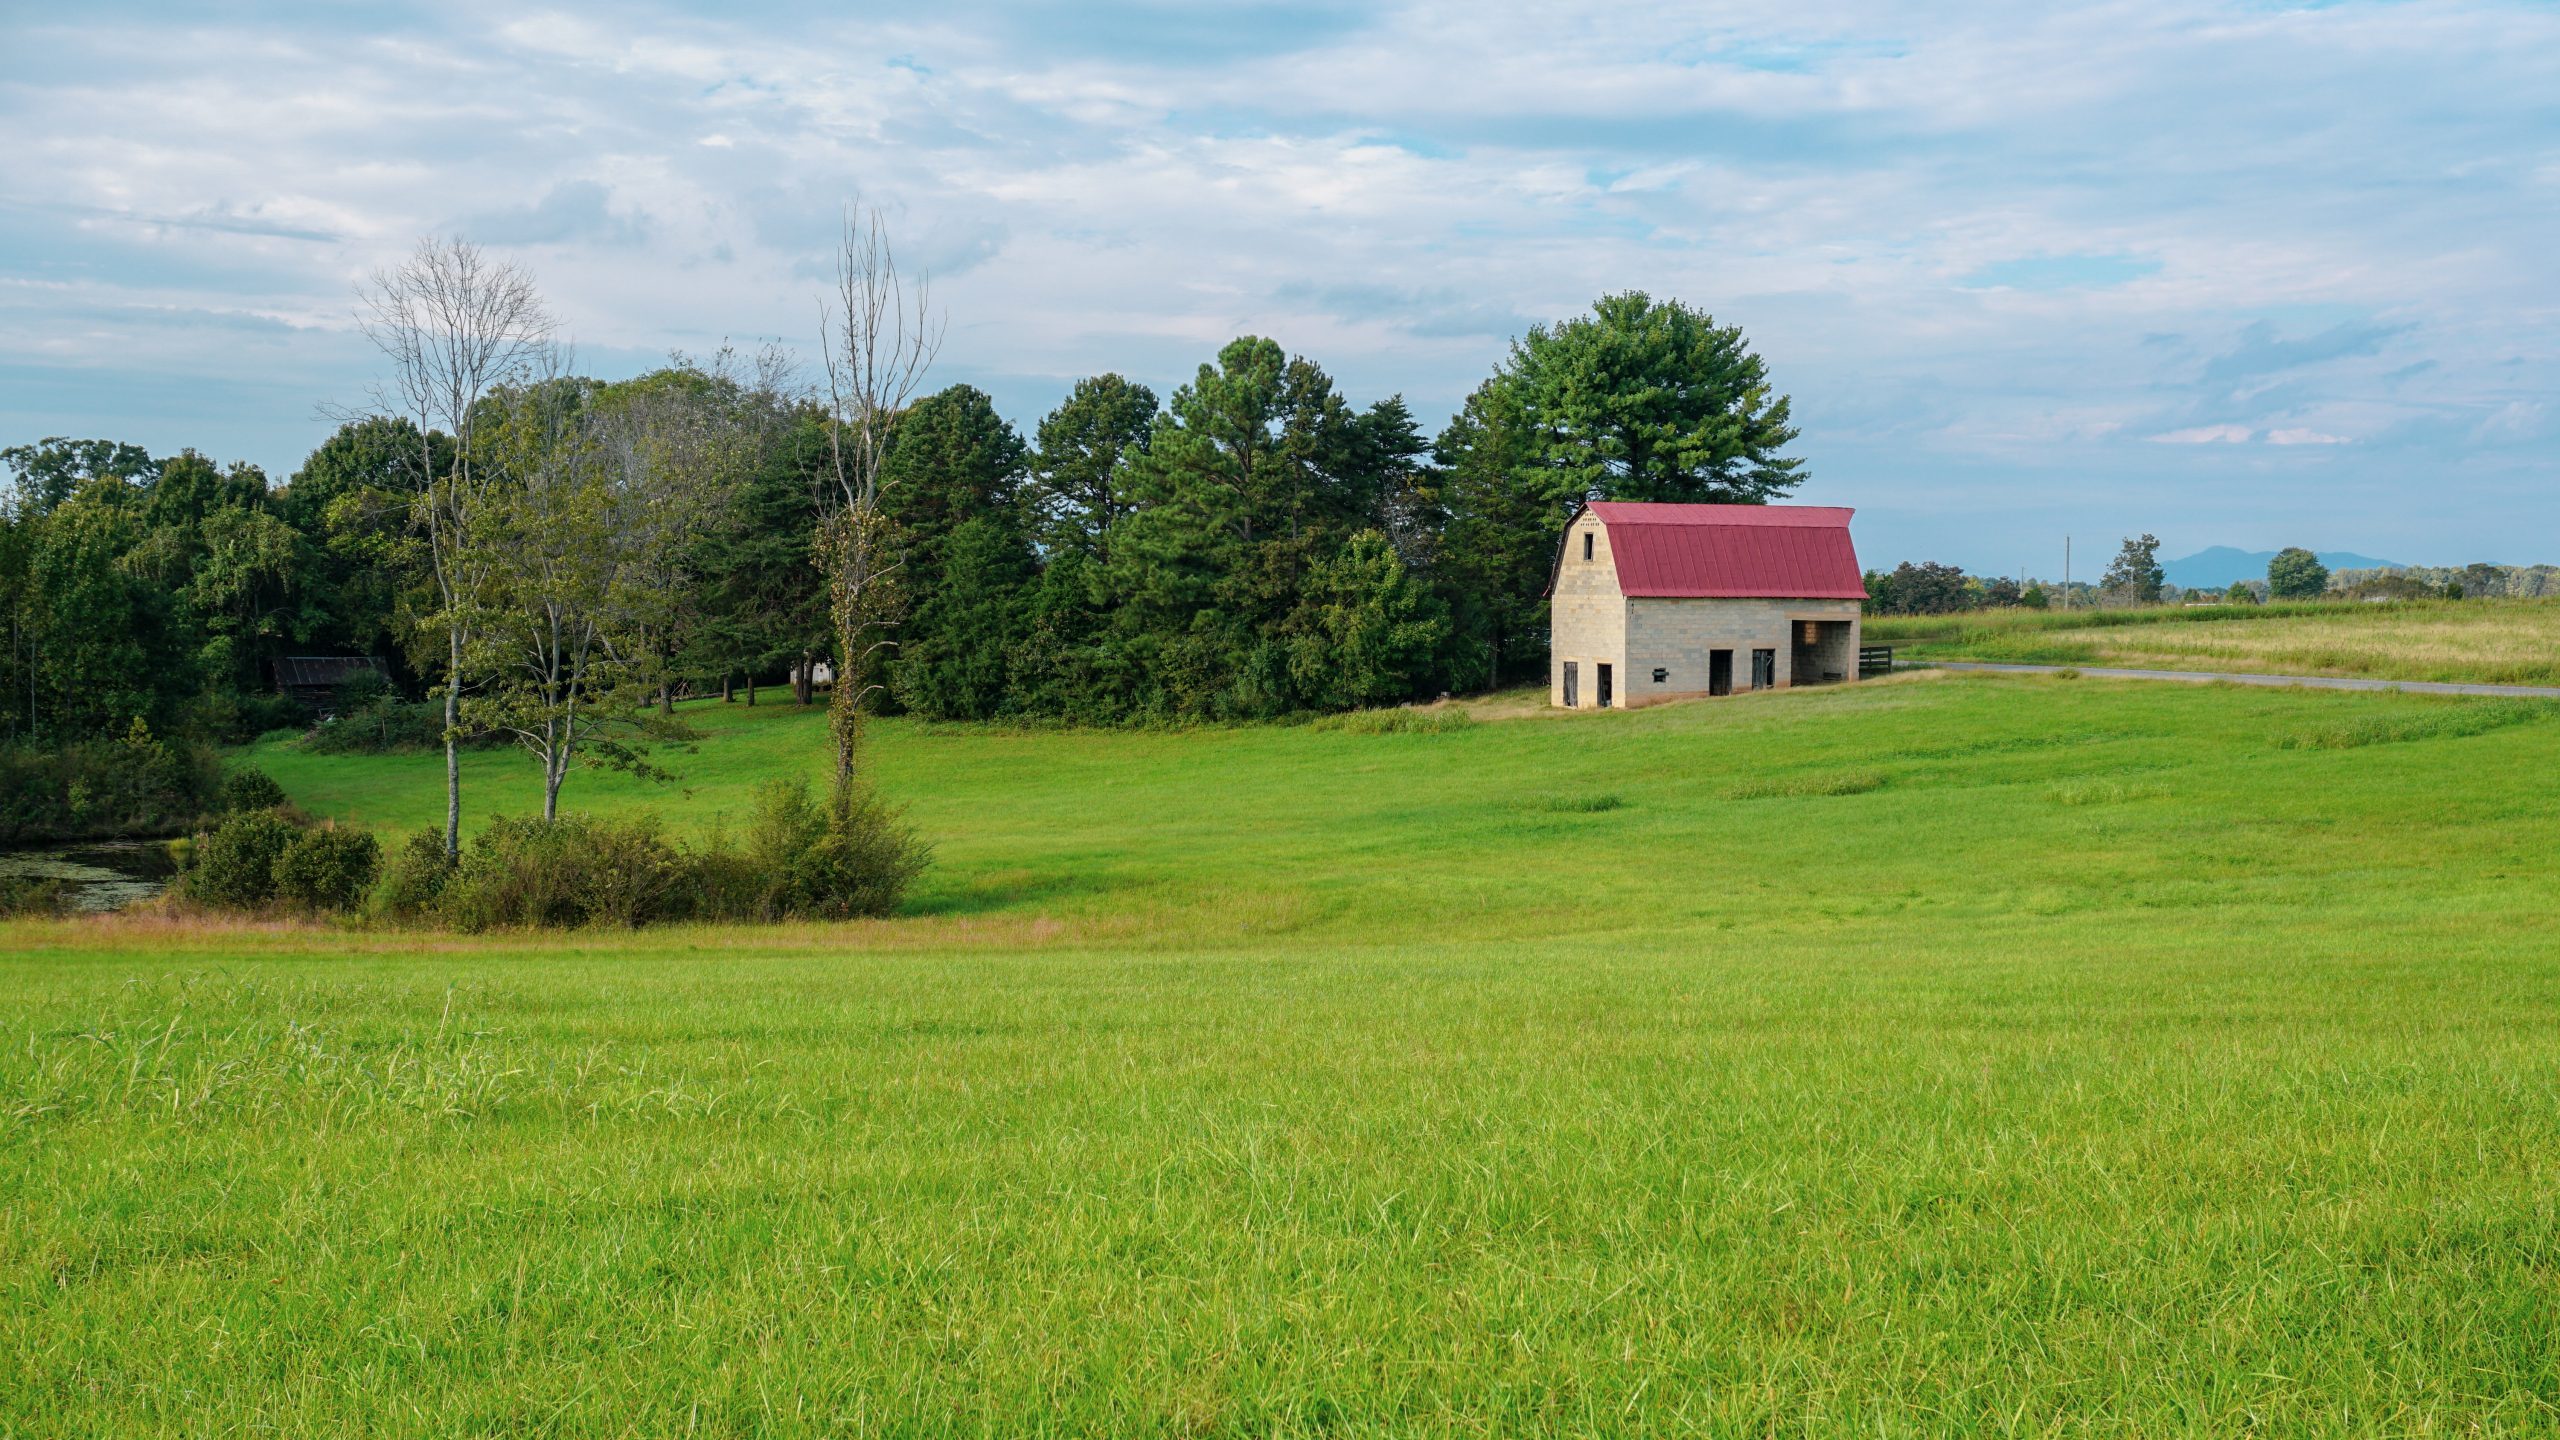 cute white barn with red roof in the Virginia countryside surrounded by lush green grass.